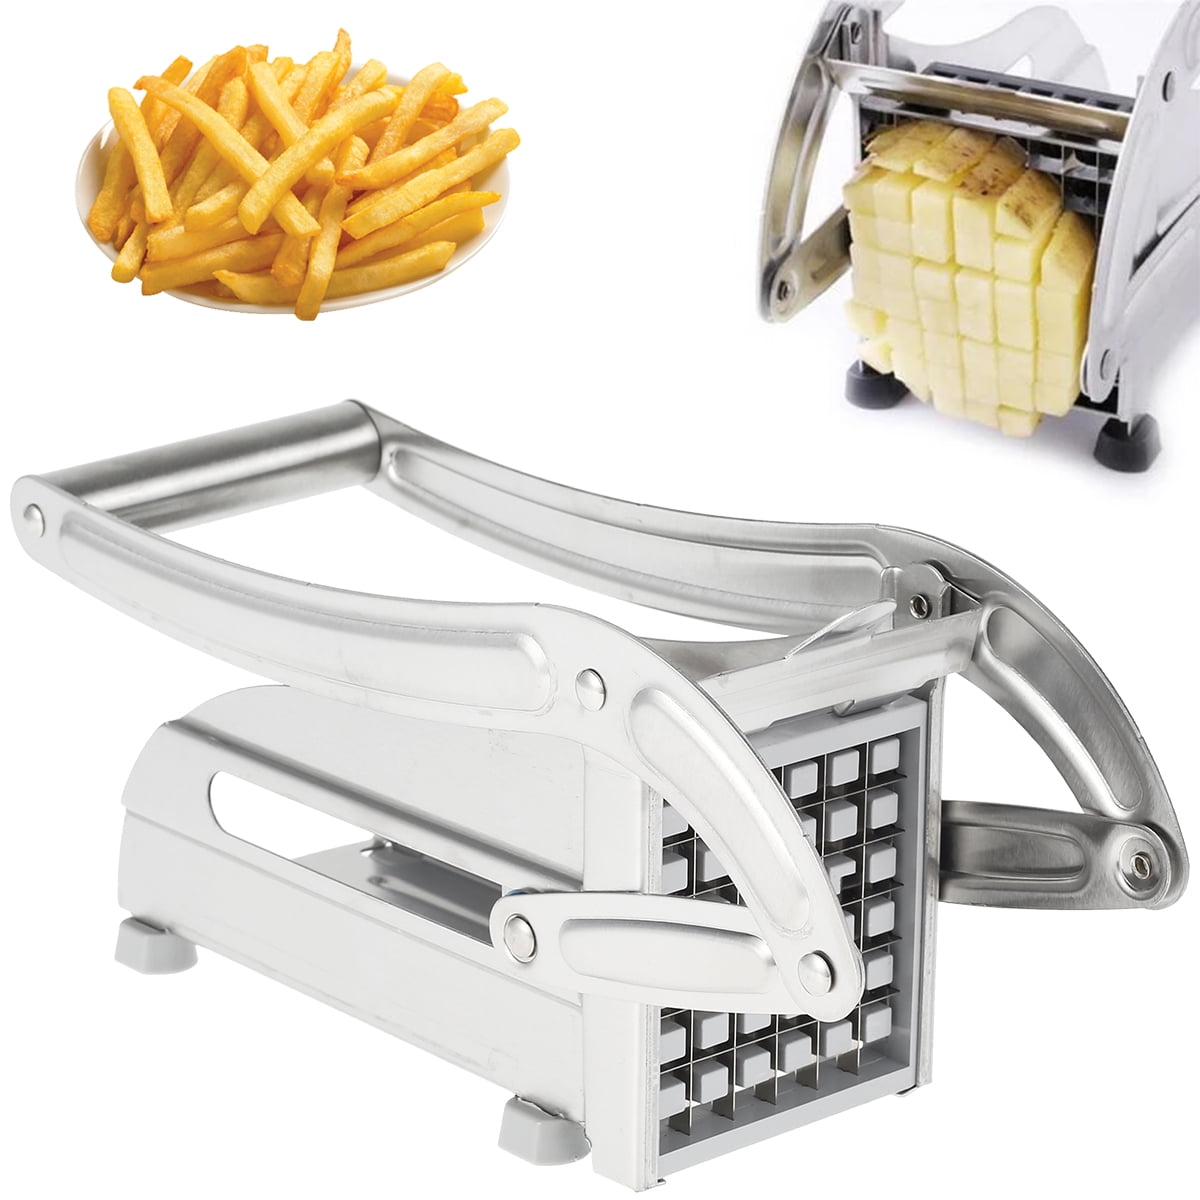 Skip the Drive-Thru—This French Fry Cutter That Makes 'Perfect Fries' Is  50% Off Right Now